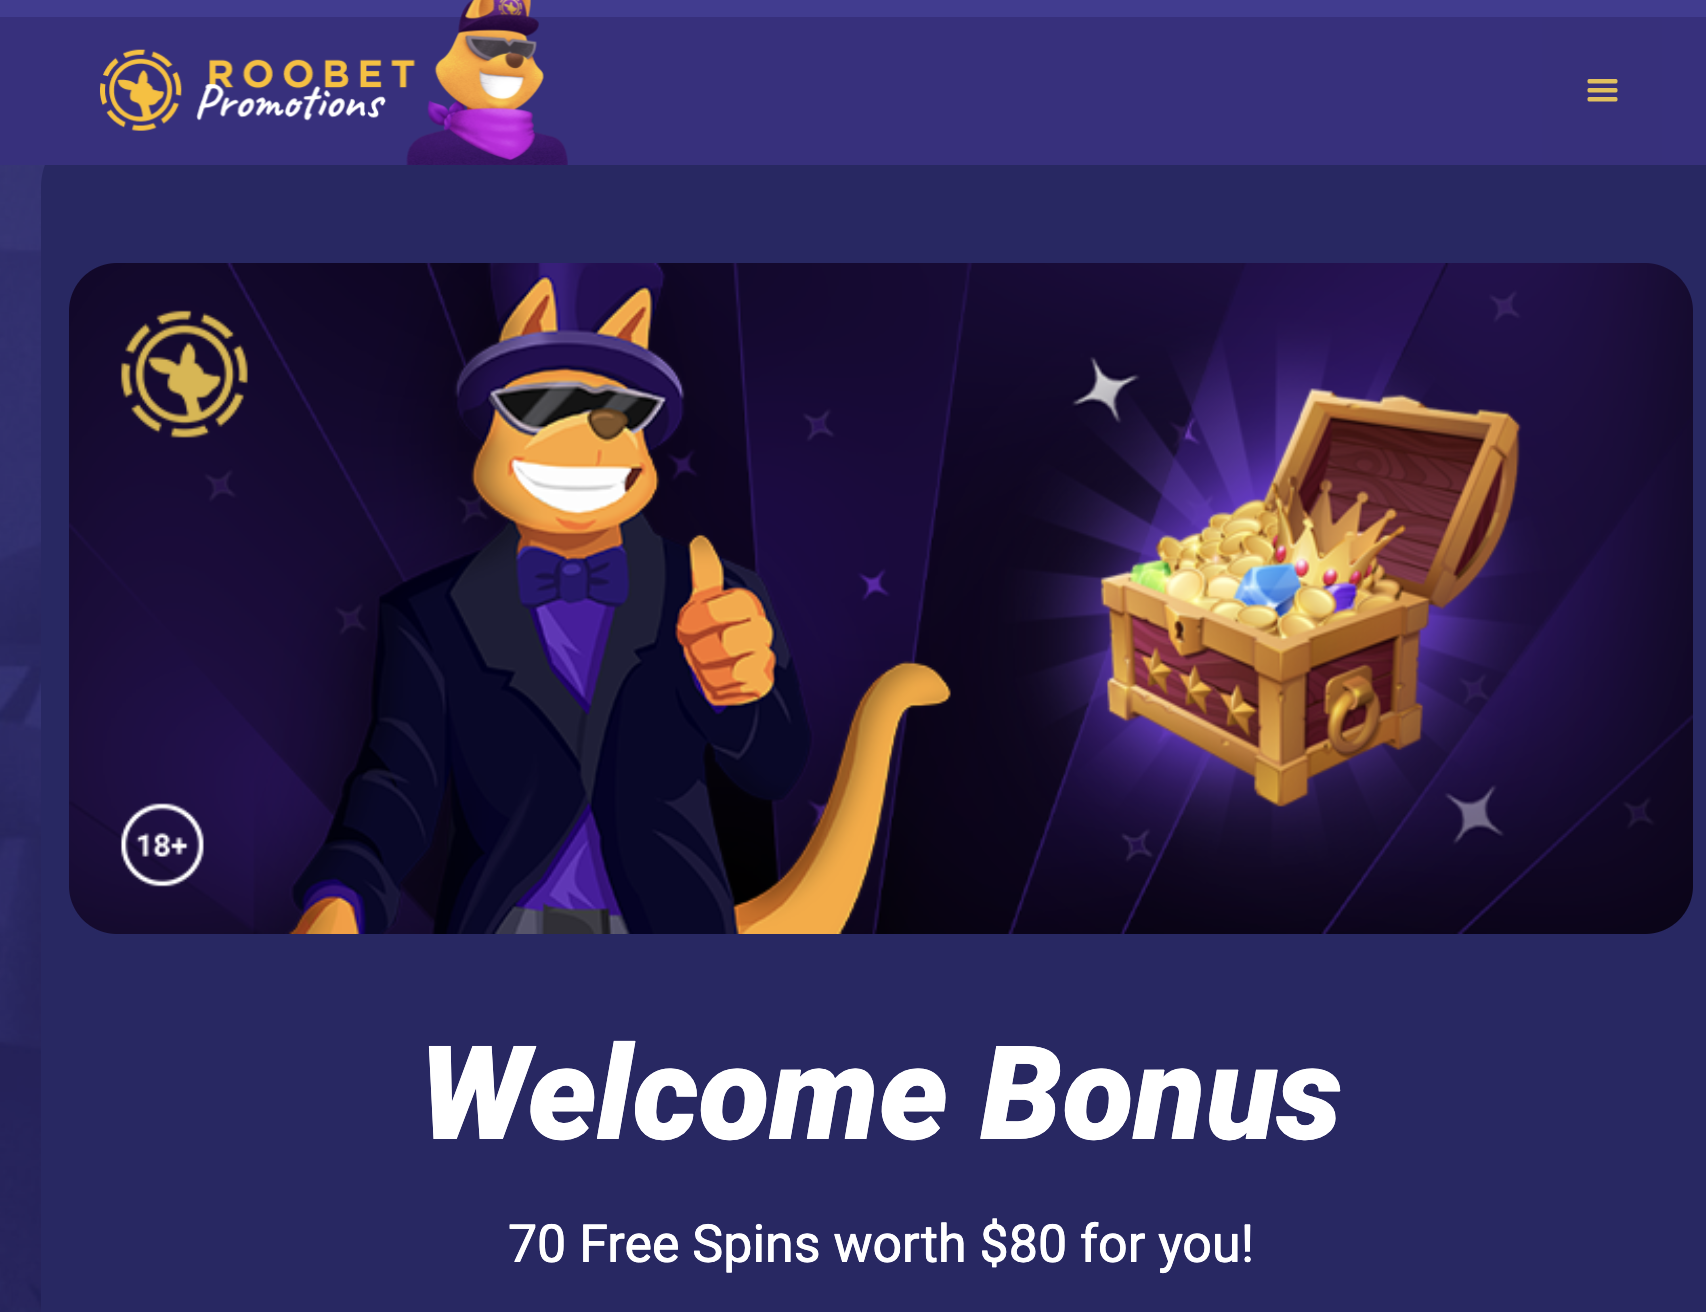 Roobet Promotions and Welcome Bonus